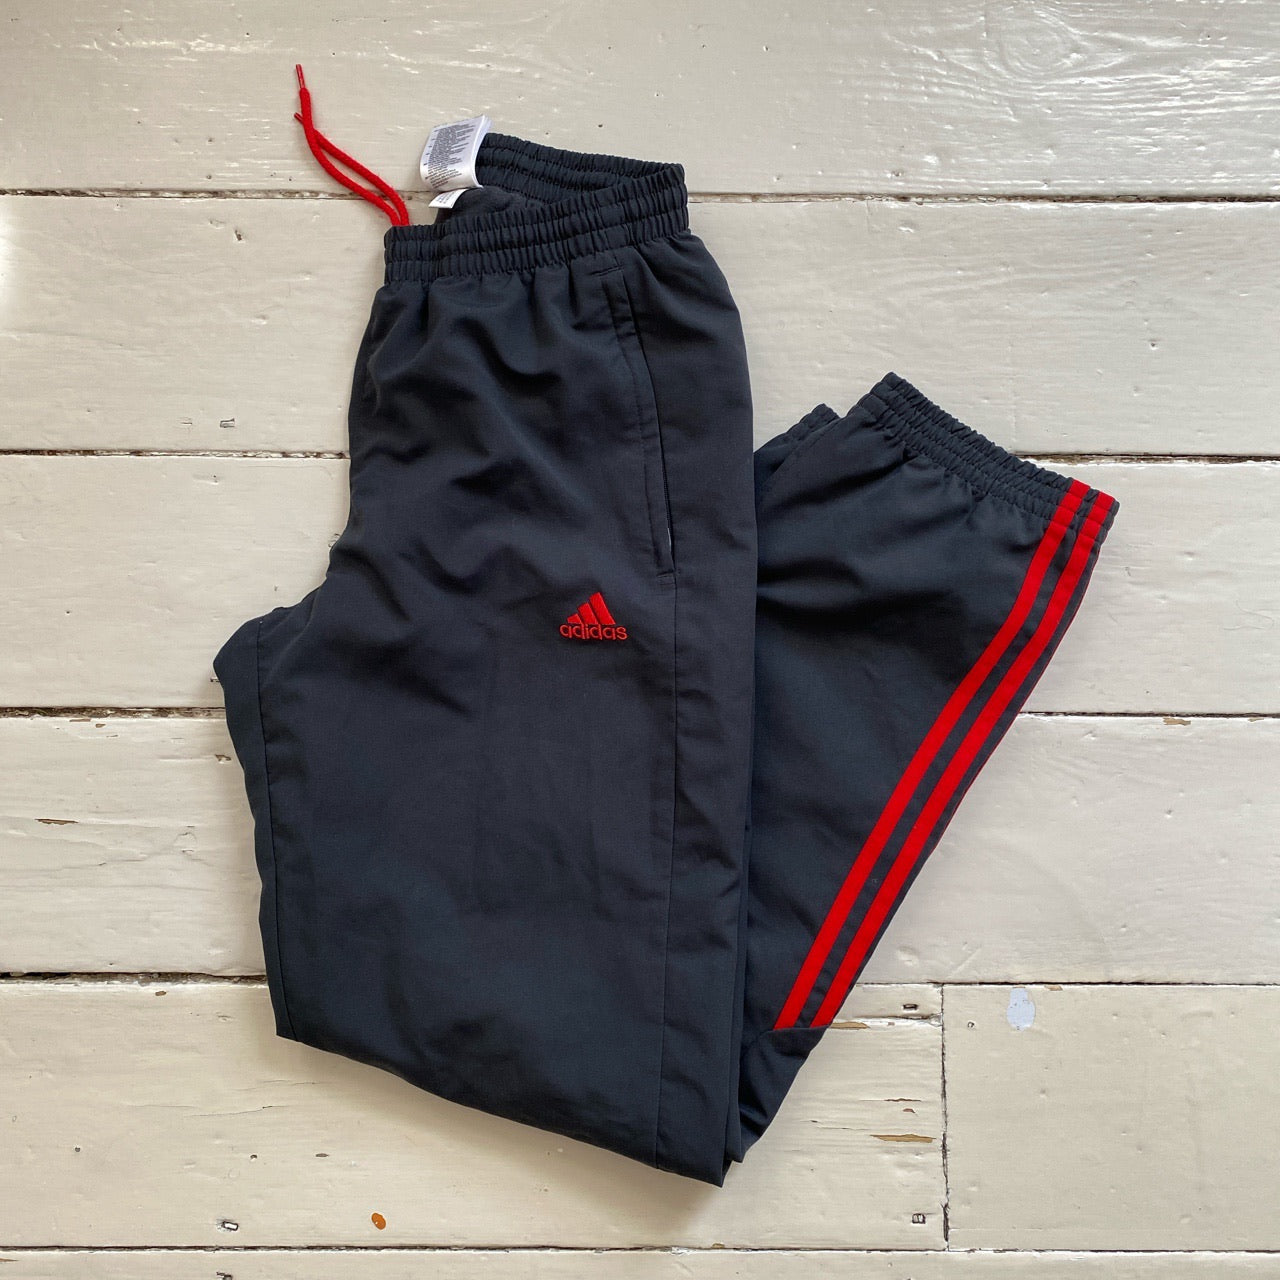 Adidas Black and Red Shell Bottoms (Small)